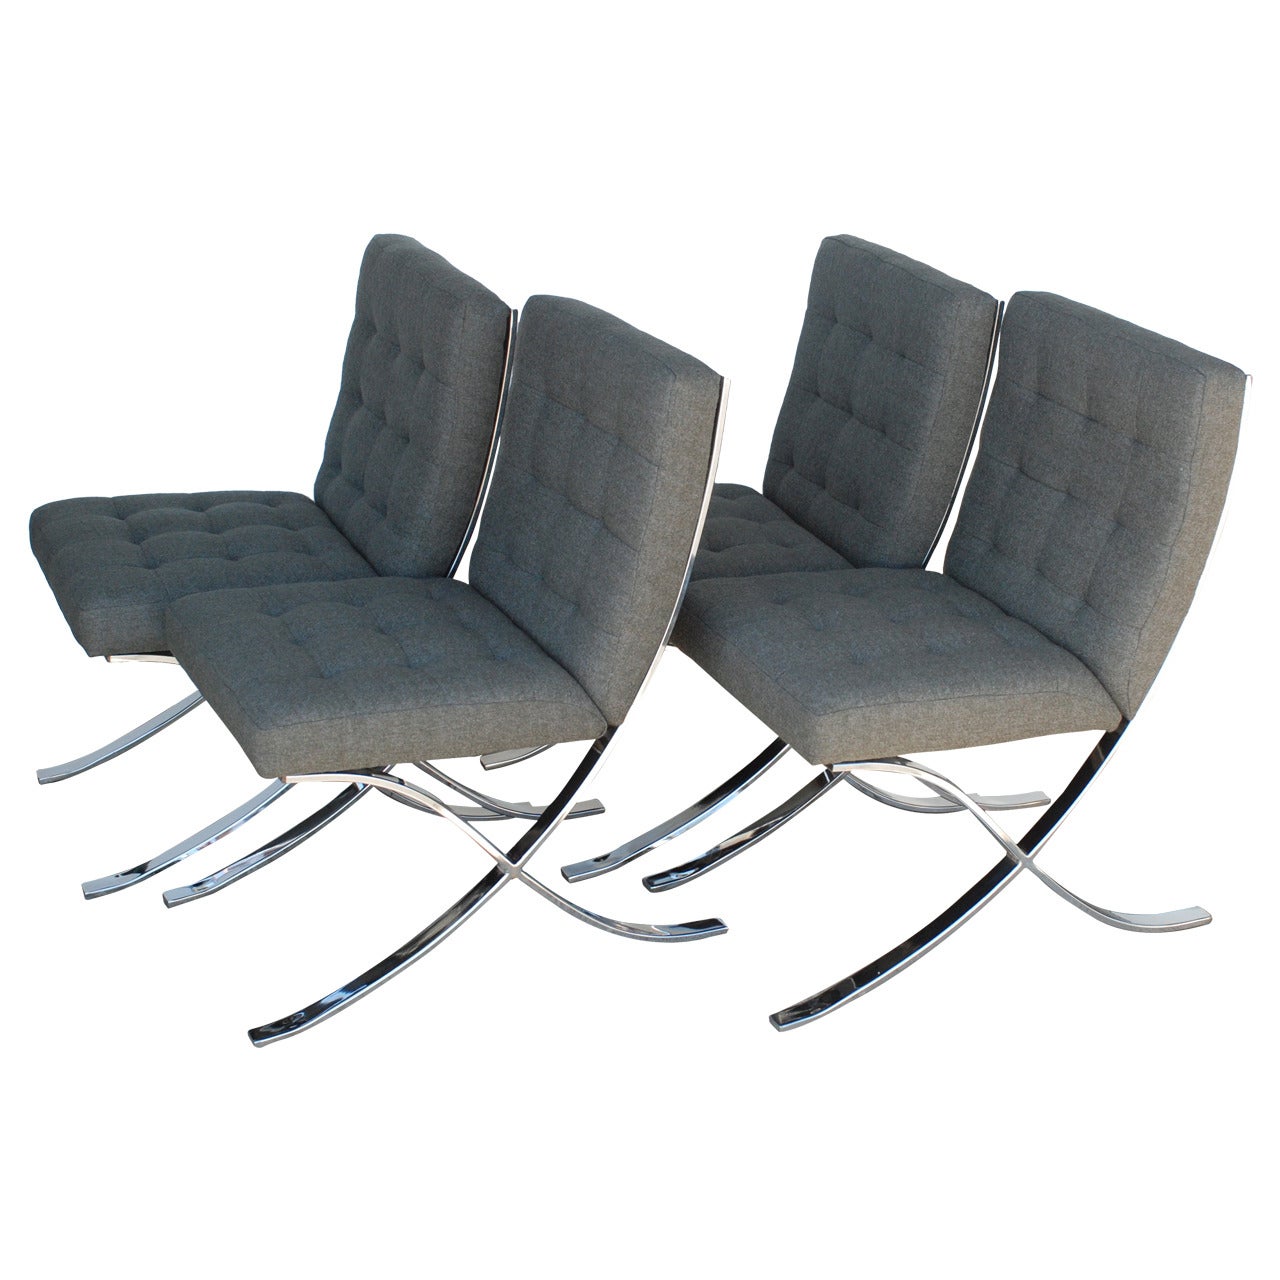 Set of Four 1970s Chrome and Charcoal Grey Dining Chairs For Sale